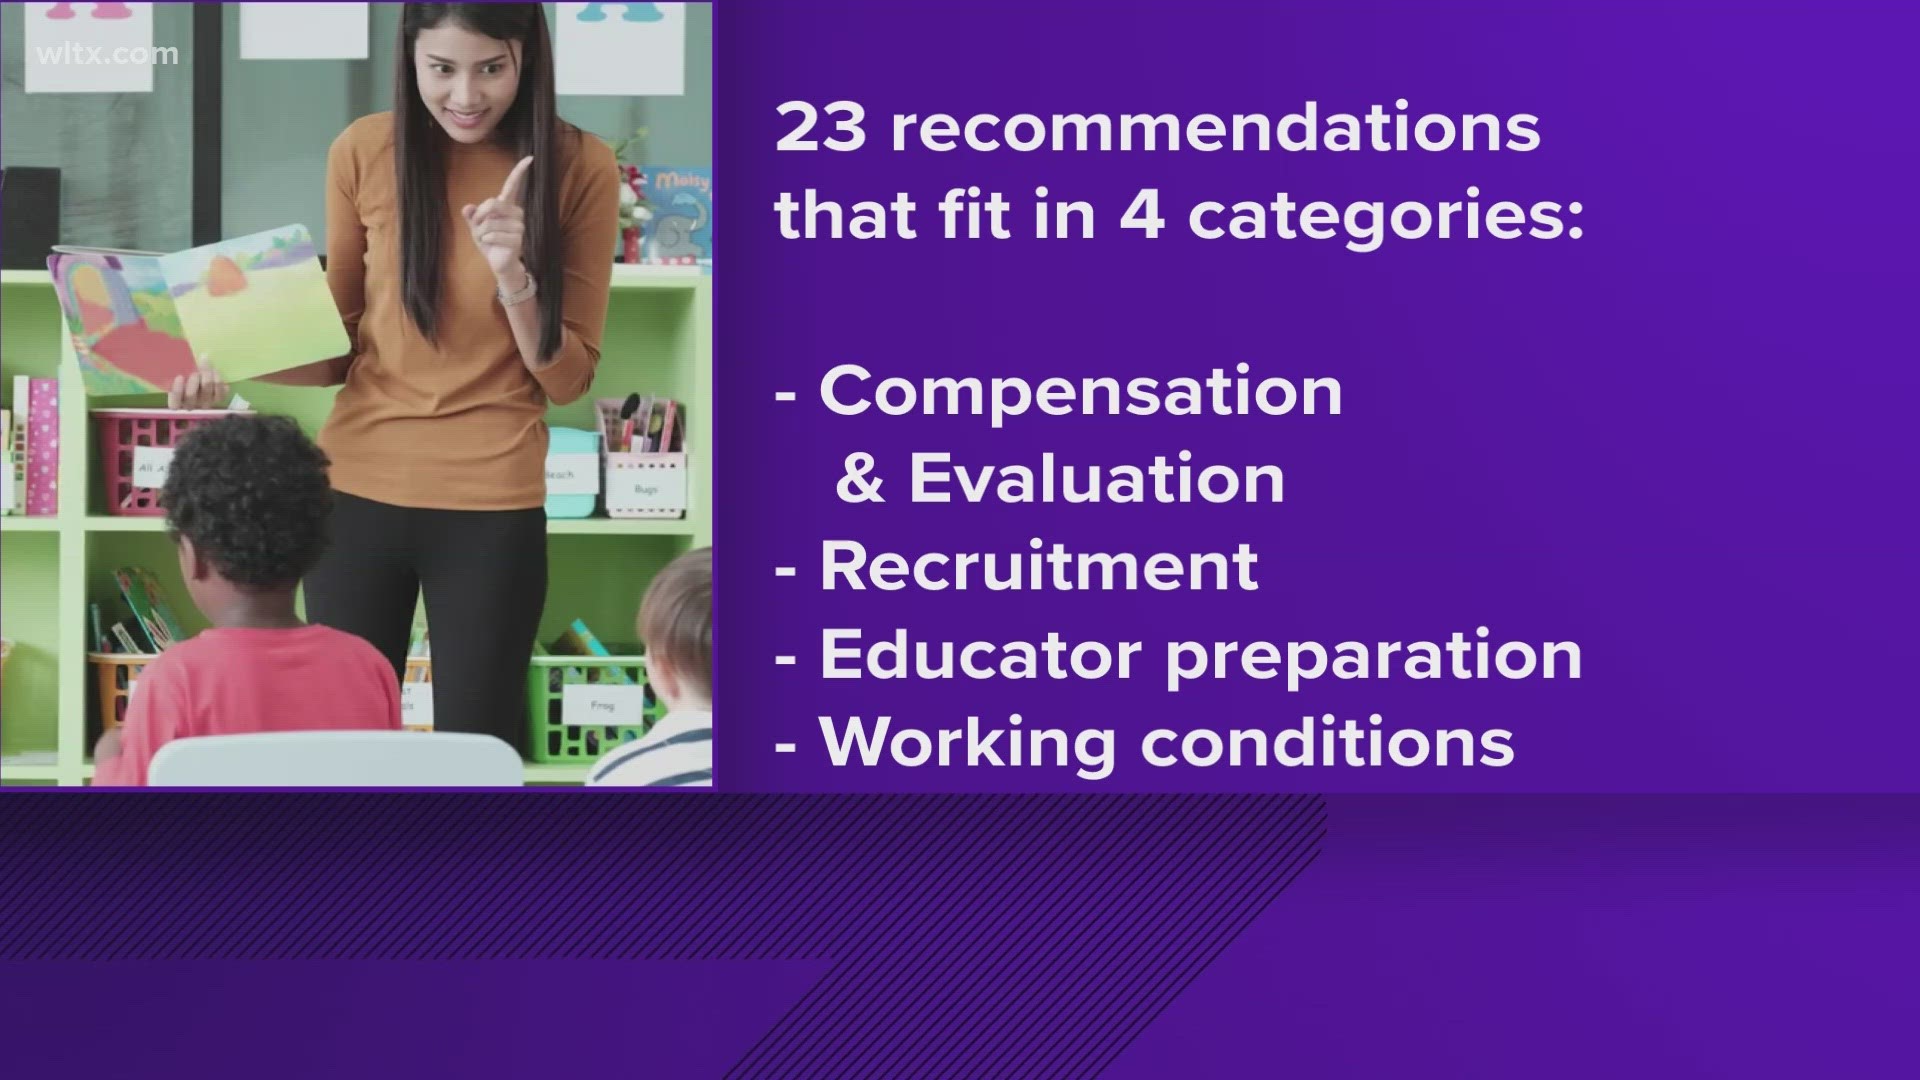 The report outlines 23 separate recommendations in four broad categories including compensation, evaluation, recruitment, educator preparation and working conditions